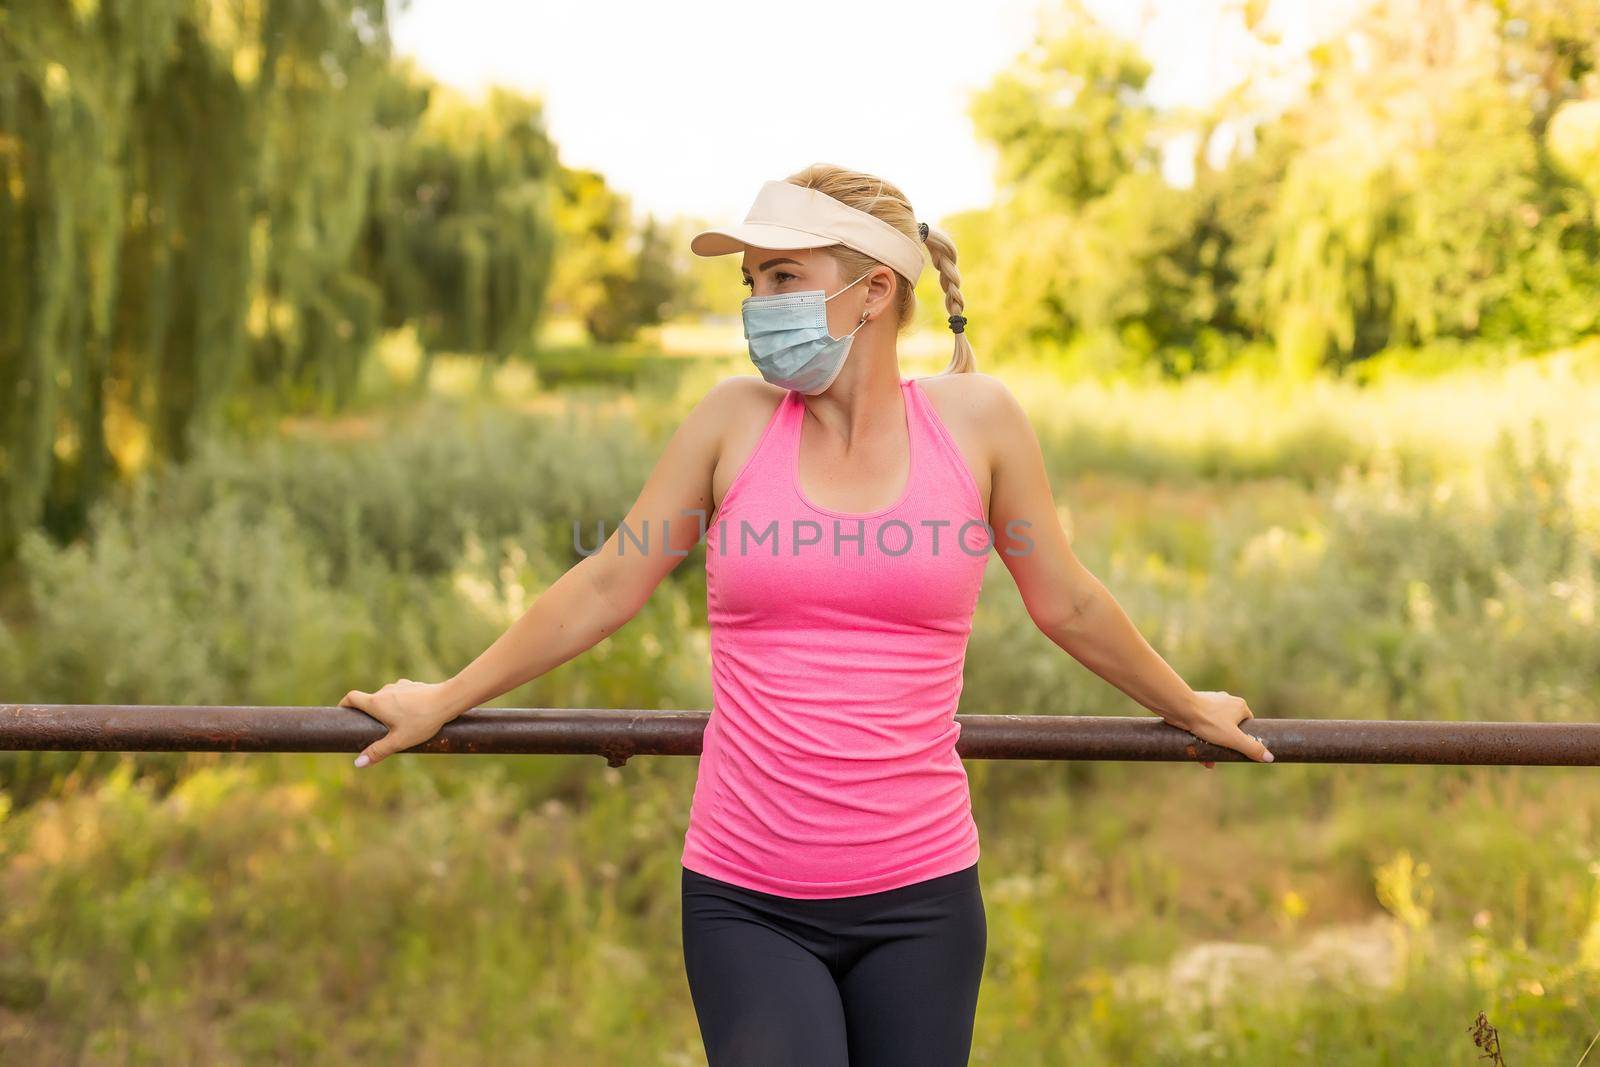 Pandemic coronavirus COVID-19 A woman in a meadow in a sports outfit wearing a protective mask in case of the spread of SARS-CoV-2 disease virus. Girl with a protective mask on her face. by Andelov13